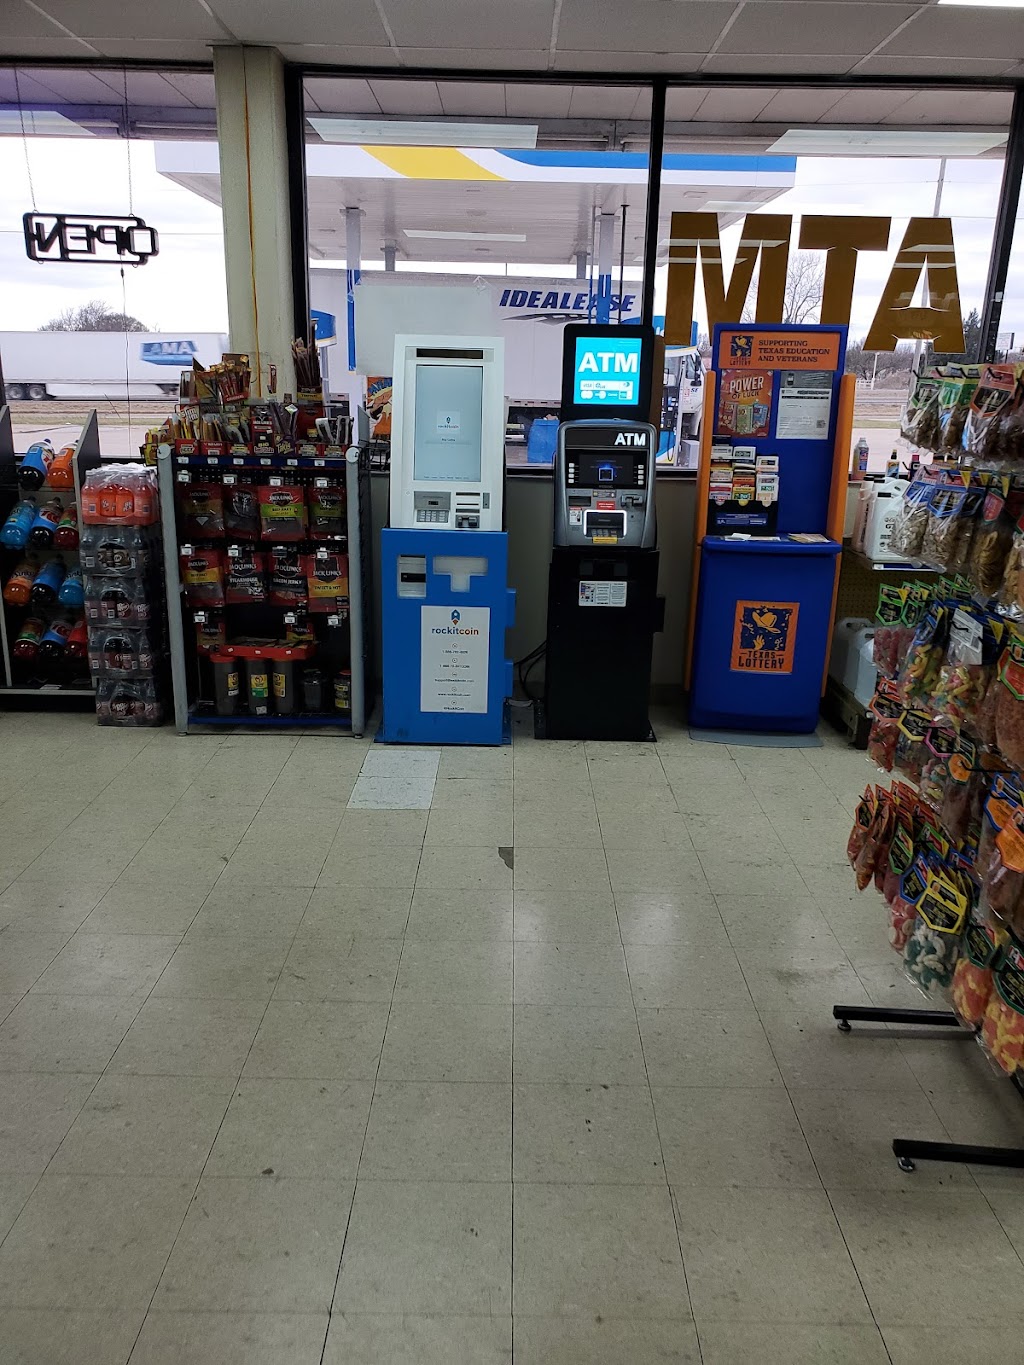 Valero | 1934 I-35 Frontage Rd, Gainesville, TX 76240, USA | Phone: (210) 345-2000